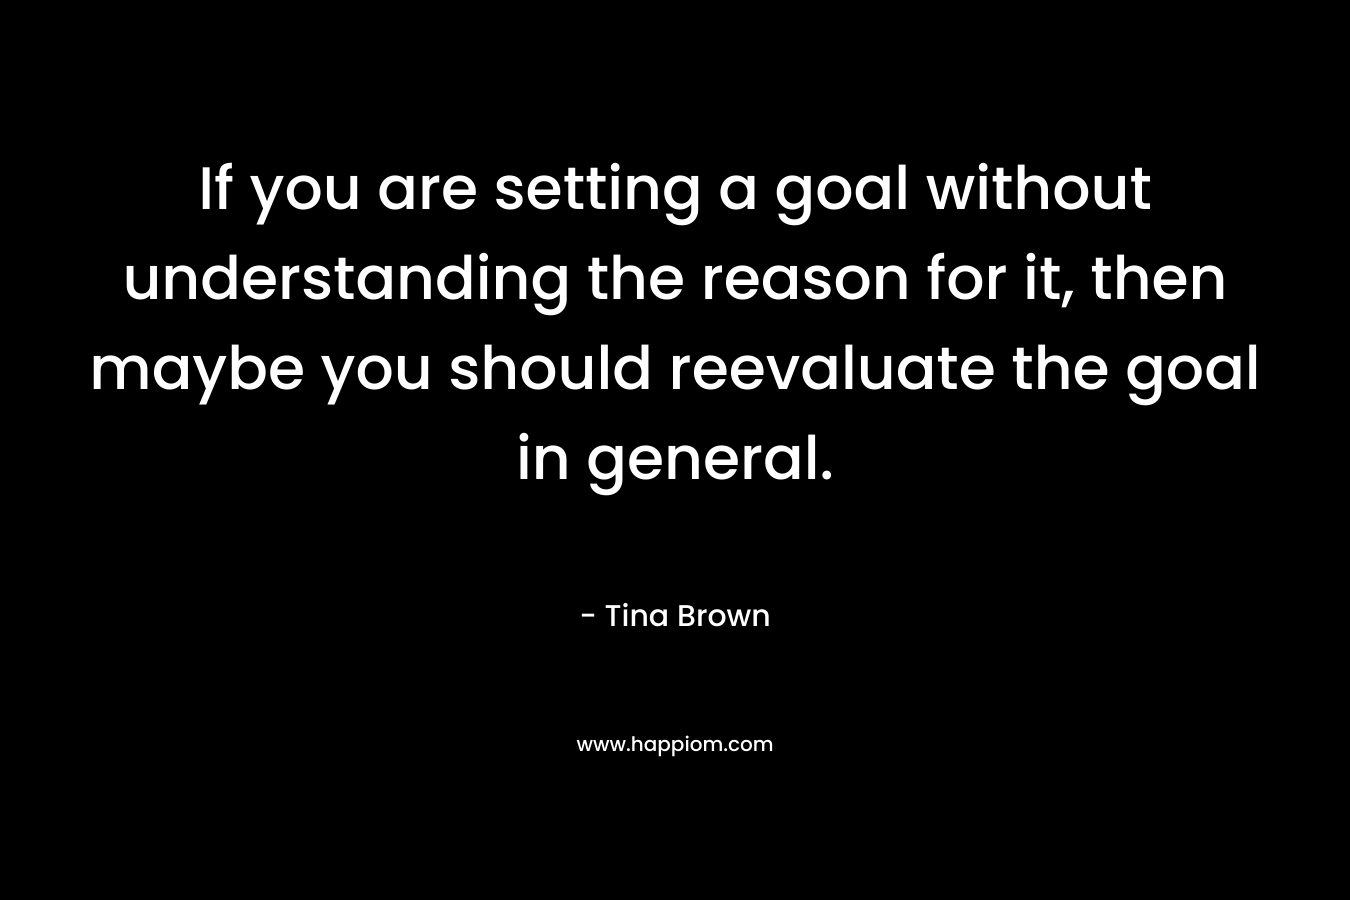 If you are setting a goal without understanding the reason for it, then maybe you should reevaluate the goal in general. – Tina Brown